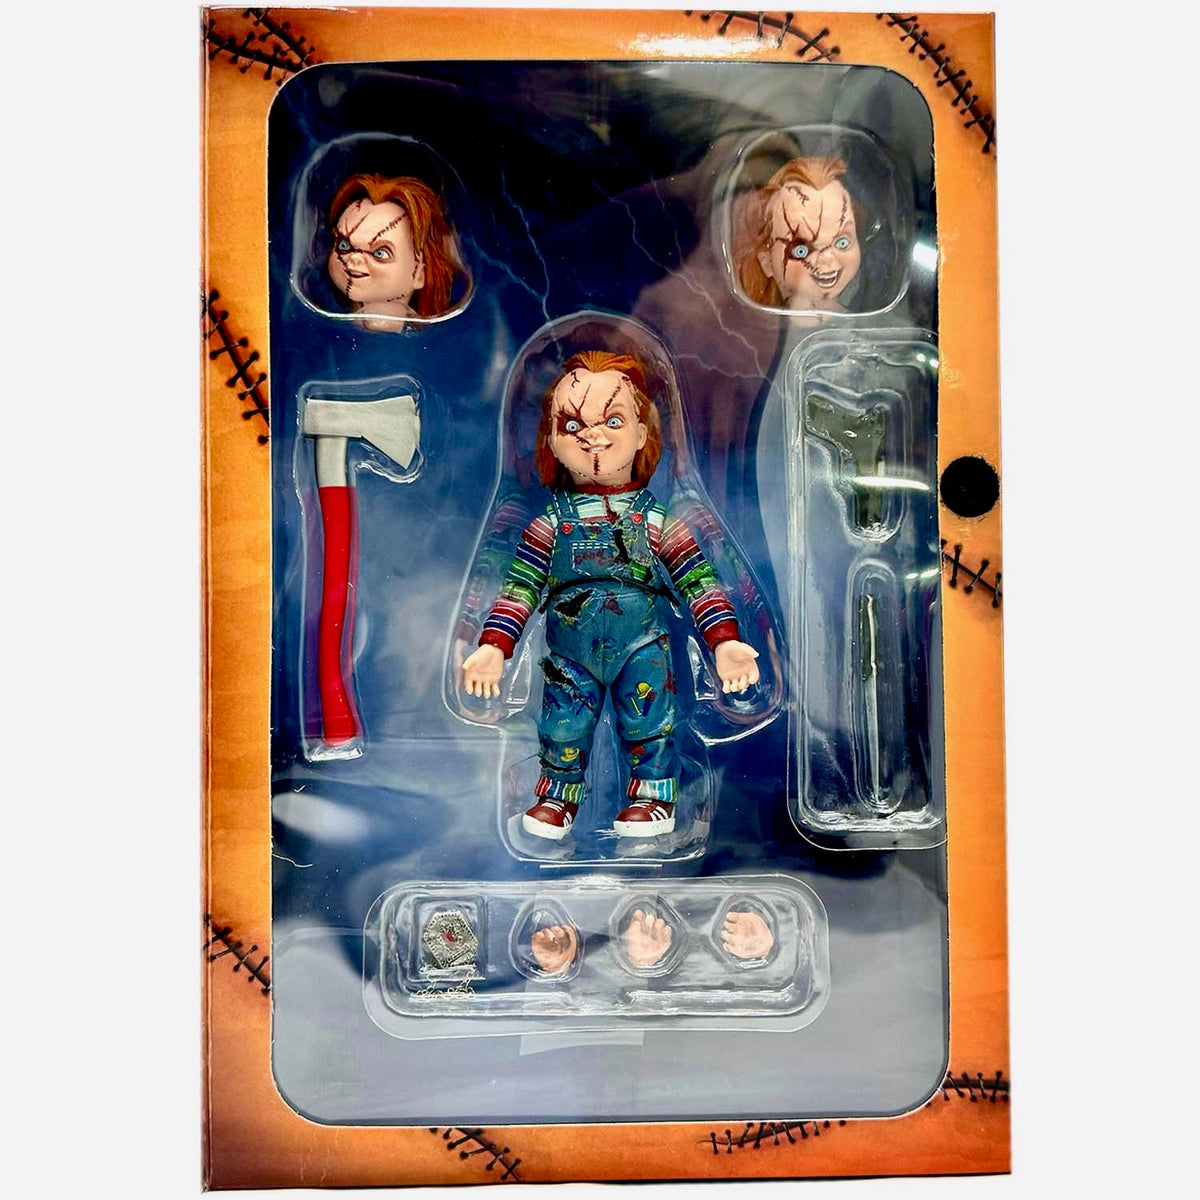 Bride of Chucky: Ultimate Damaged Chucky Collectible Action Figure